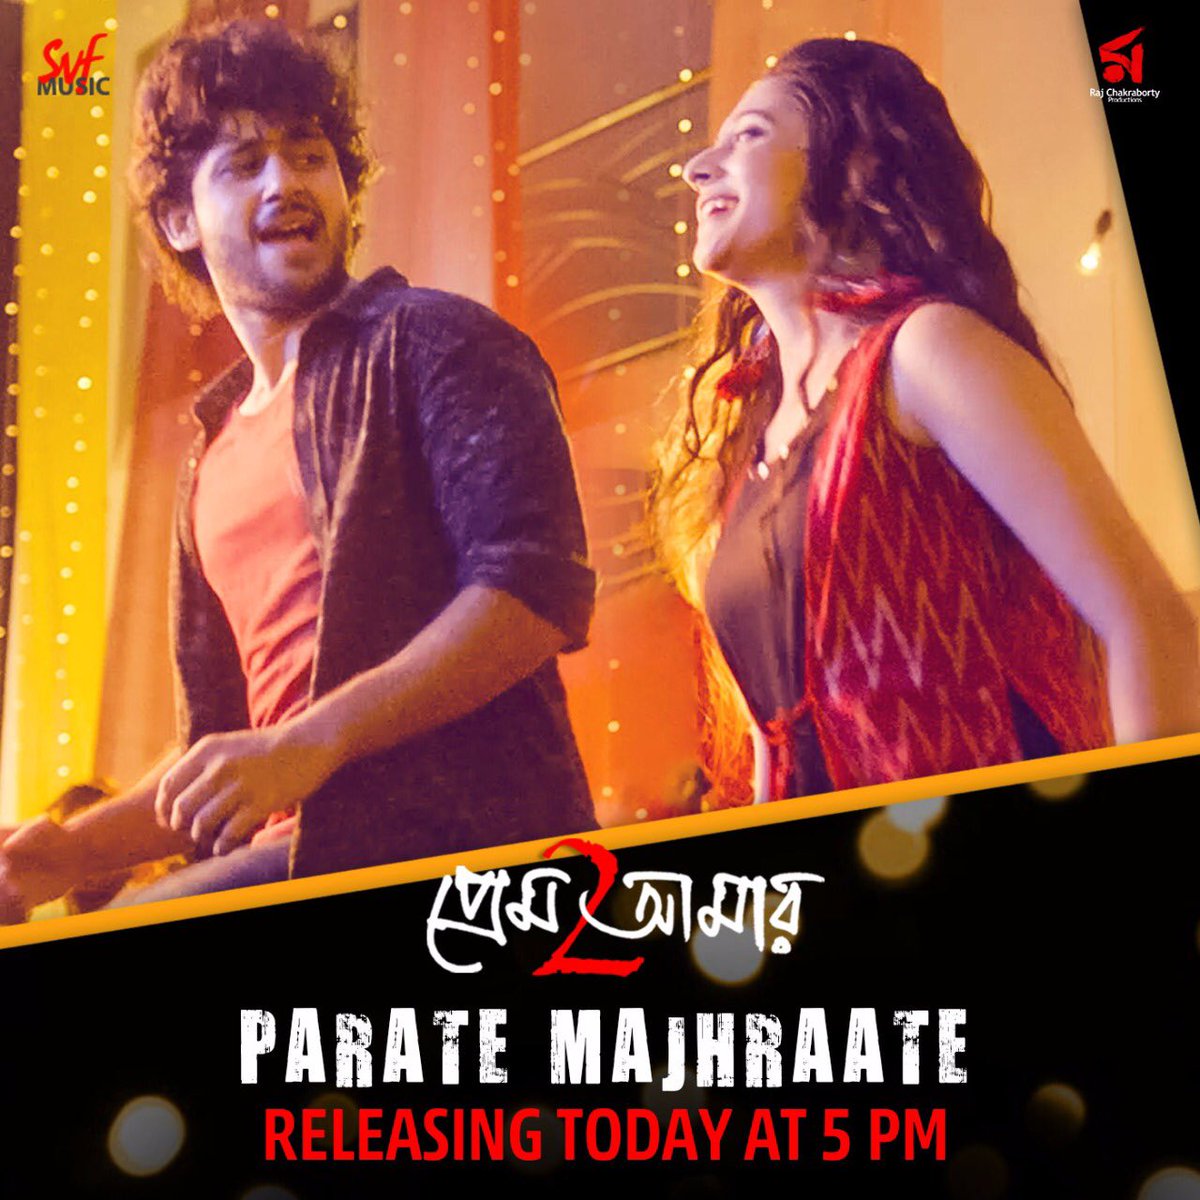 The #Party song #ParateMajharate from #PremAmar2 is releasing today at 5PM stay tuned